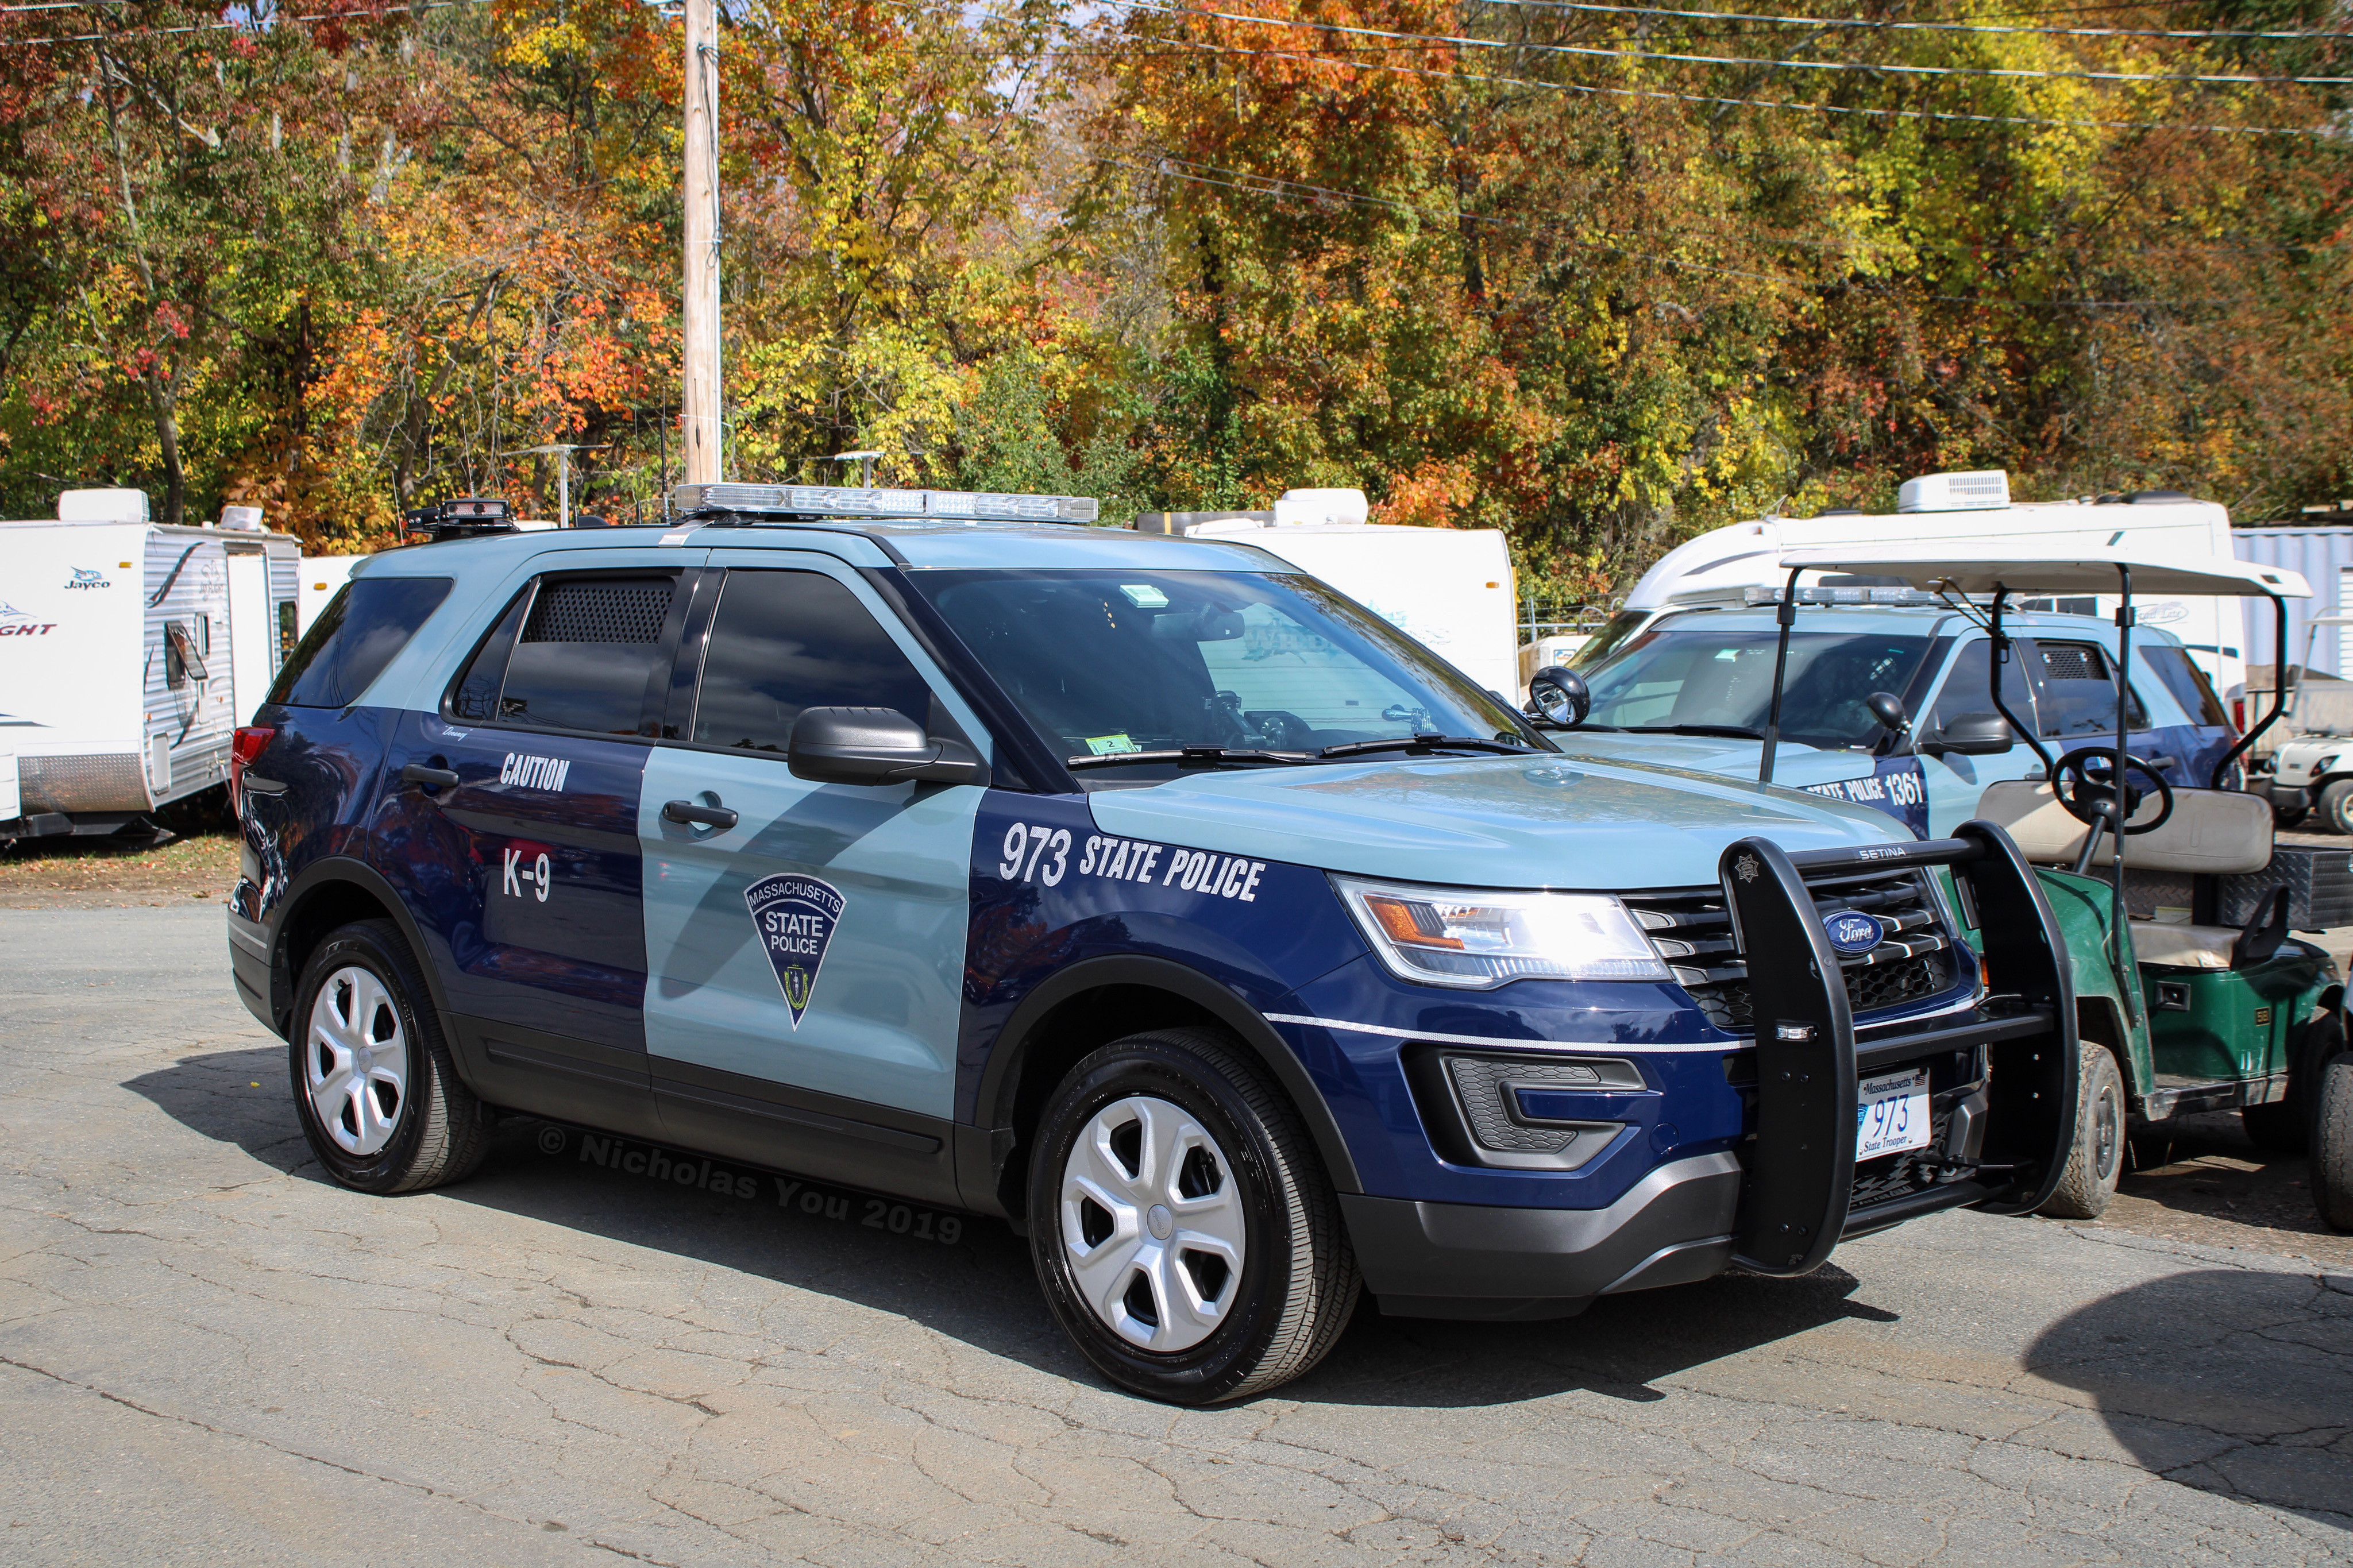 A photo  of Massachusetts State Police
            Cruiser 973, a 2019 Ford Police Interceptor Utility             taken by Nicholas You